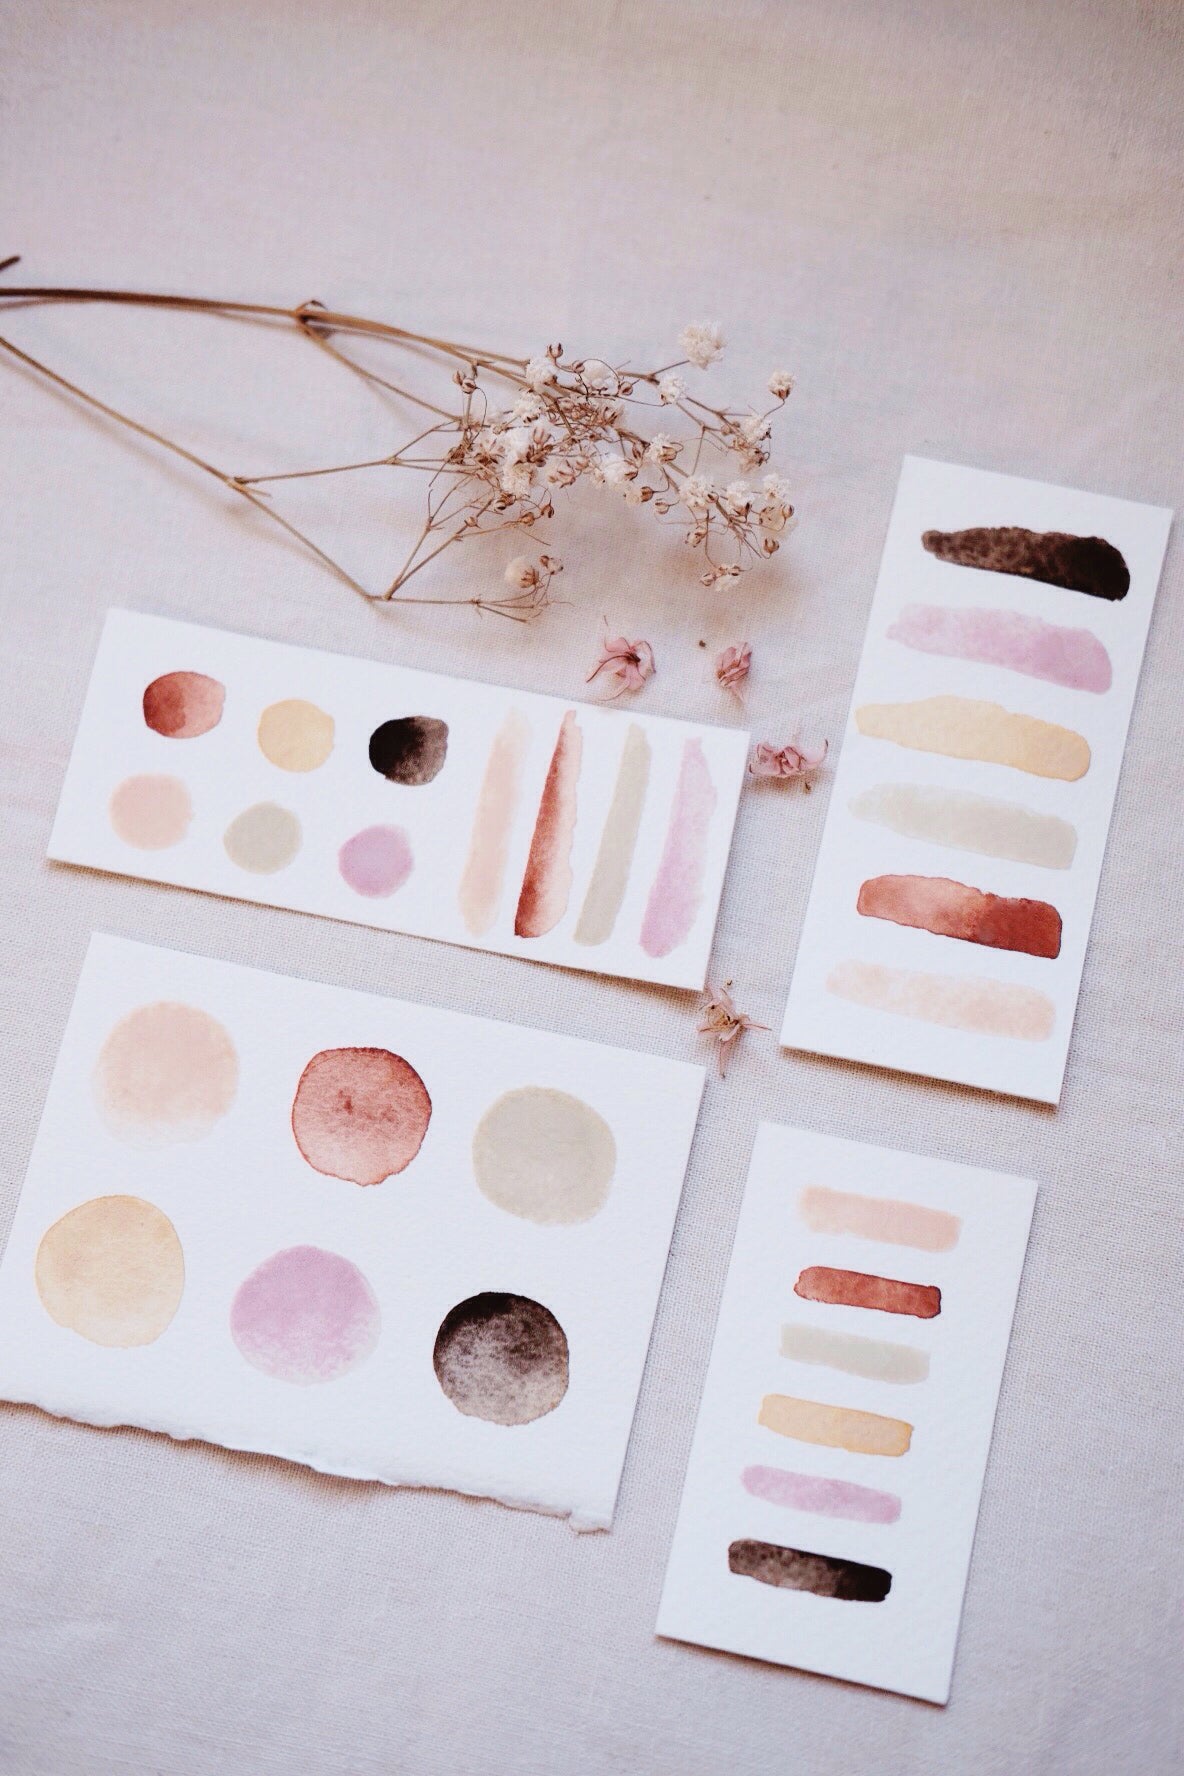 Foxtail Lily + Limited edition Gemstone Earth Mineral watercolor palette